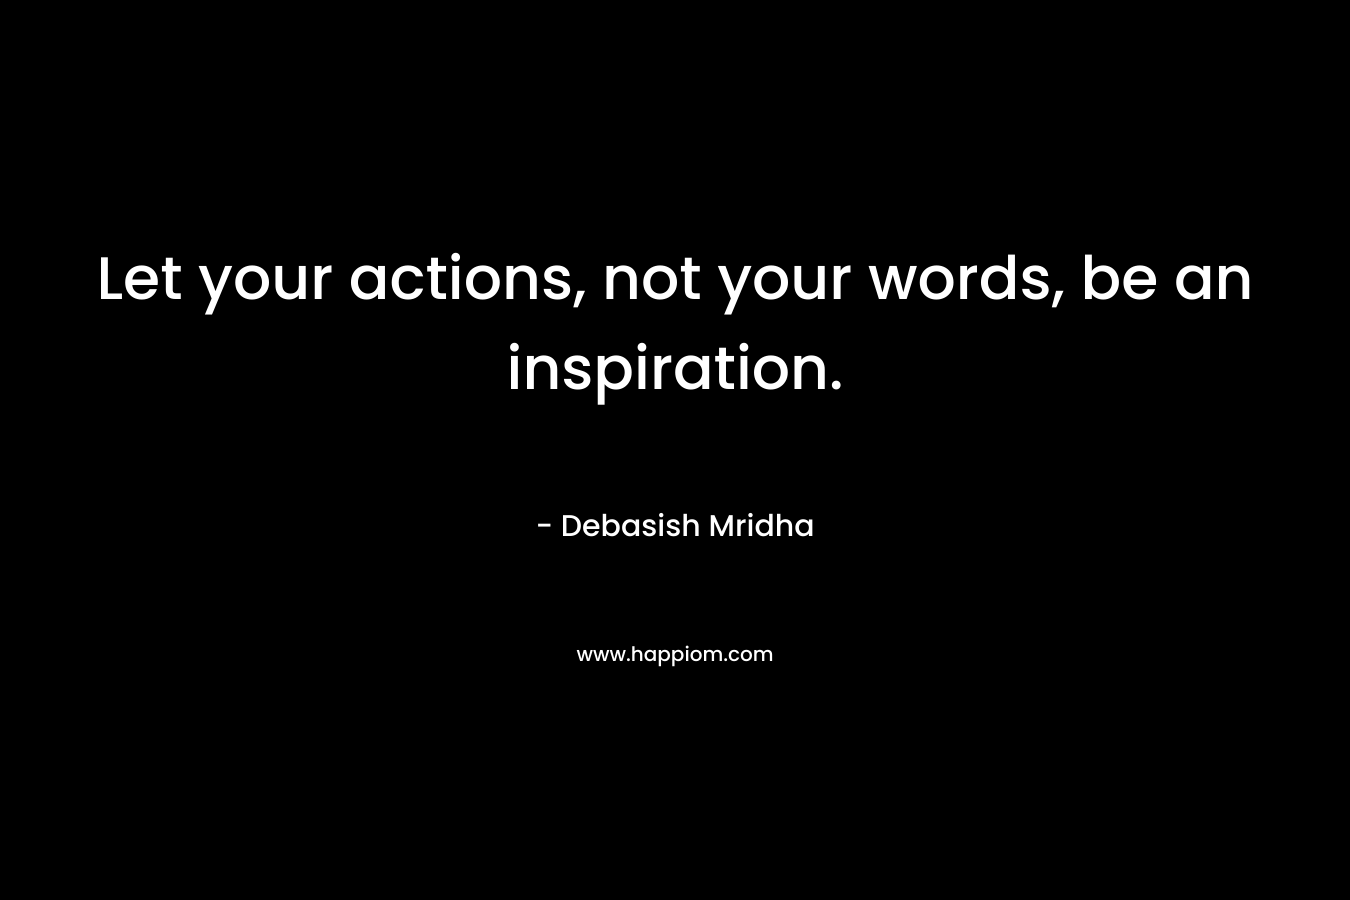 Let your actions, not your words, be an inspiration.